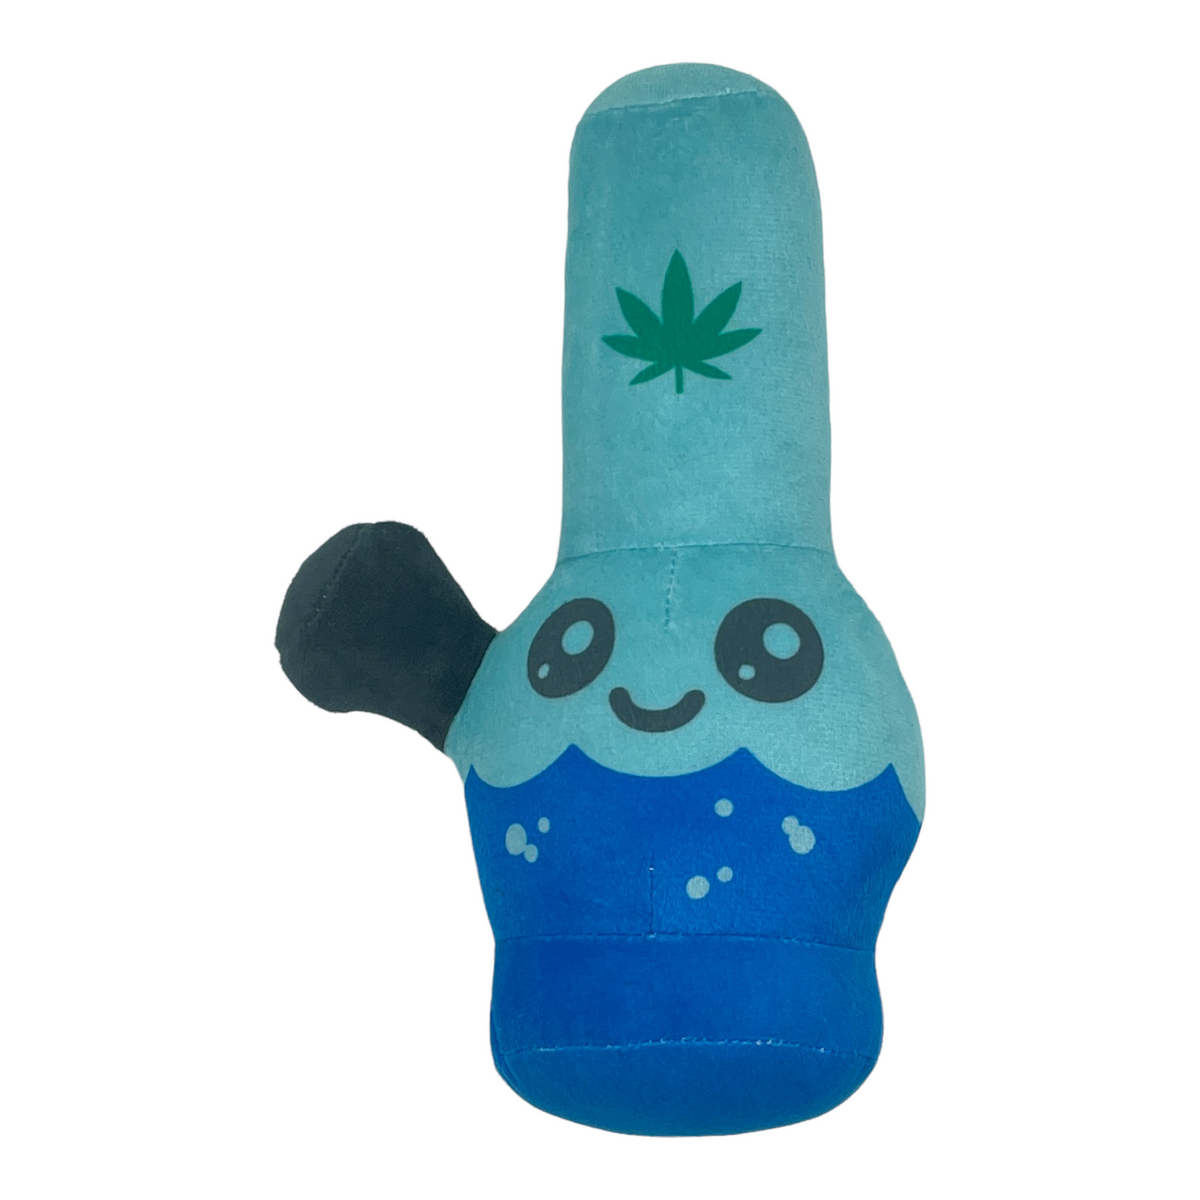 Weed Toys